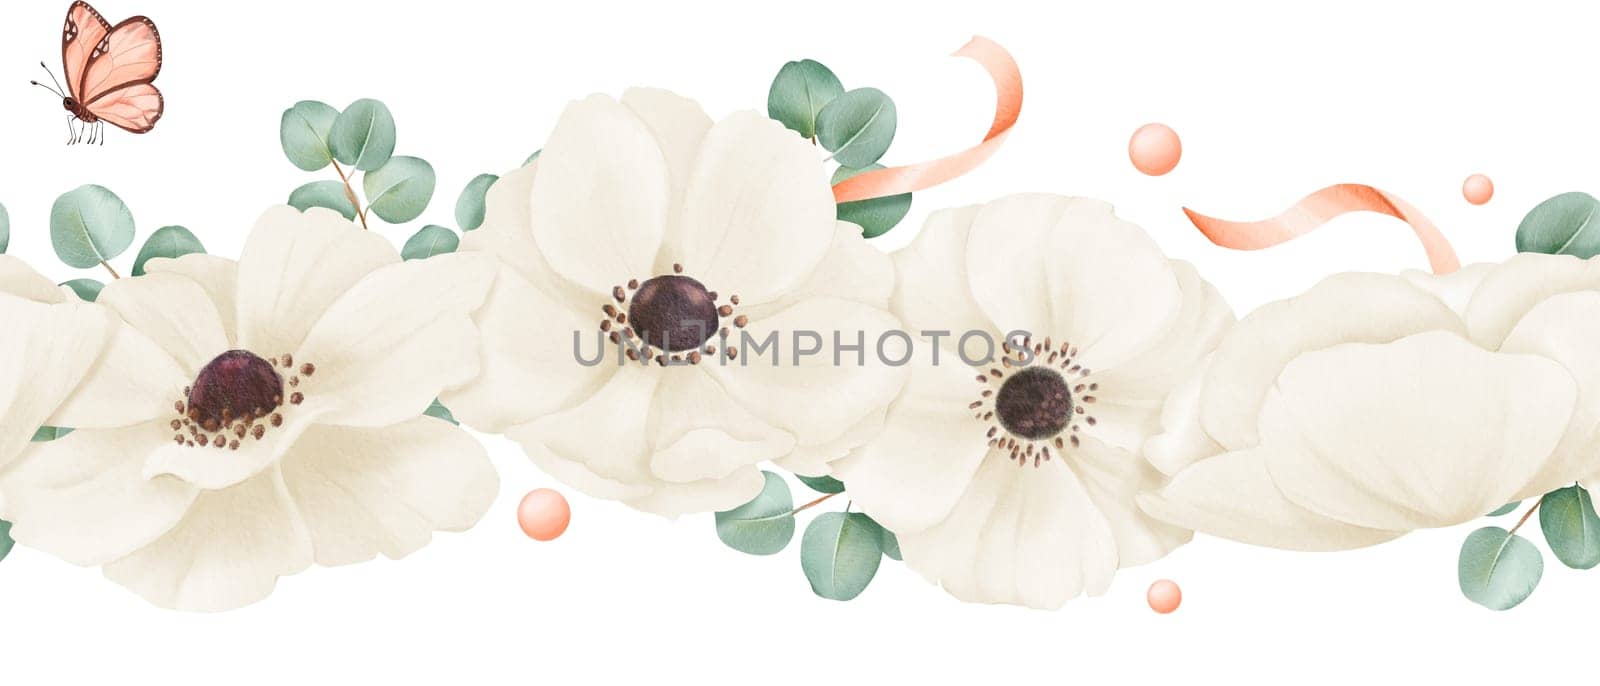 A seamless border delicate white anemones, eucalyptus leaves, adorned with ribbons, rhinestones and butterflies. watercolor illustration for wedding invitations, greeting cards or design projects.